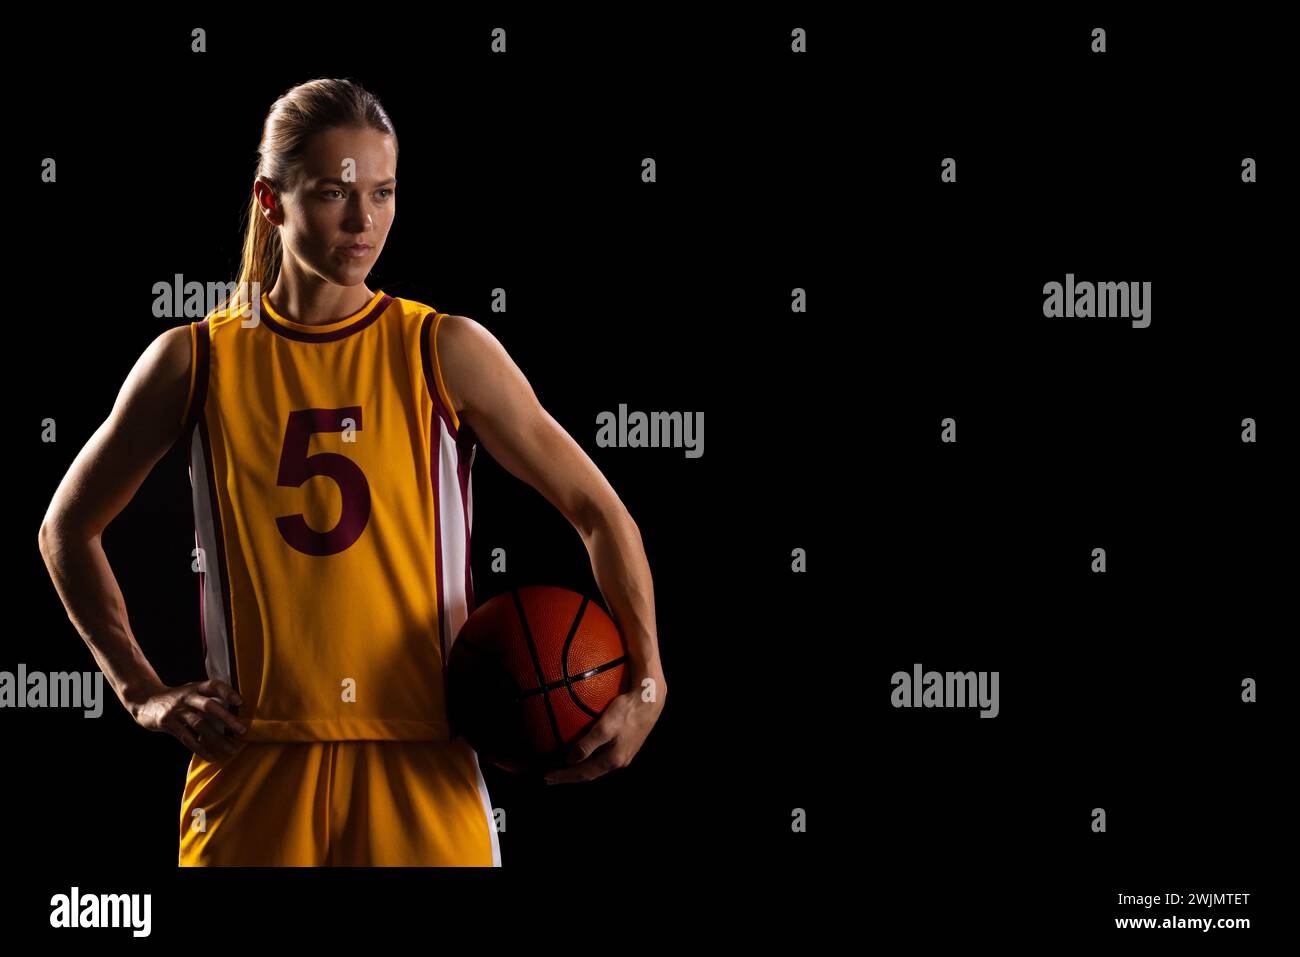 Female basketball player shows determination in uniform on black background. Stock Photo